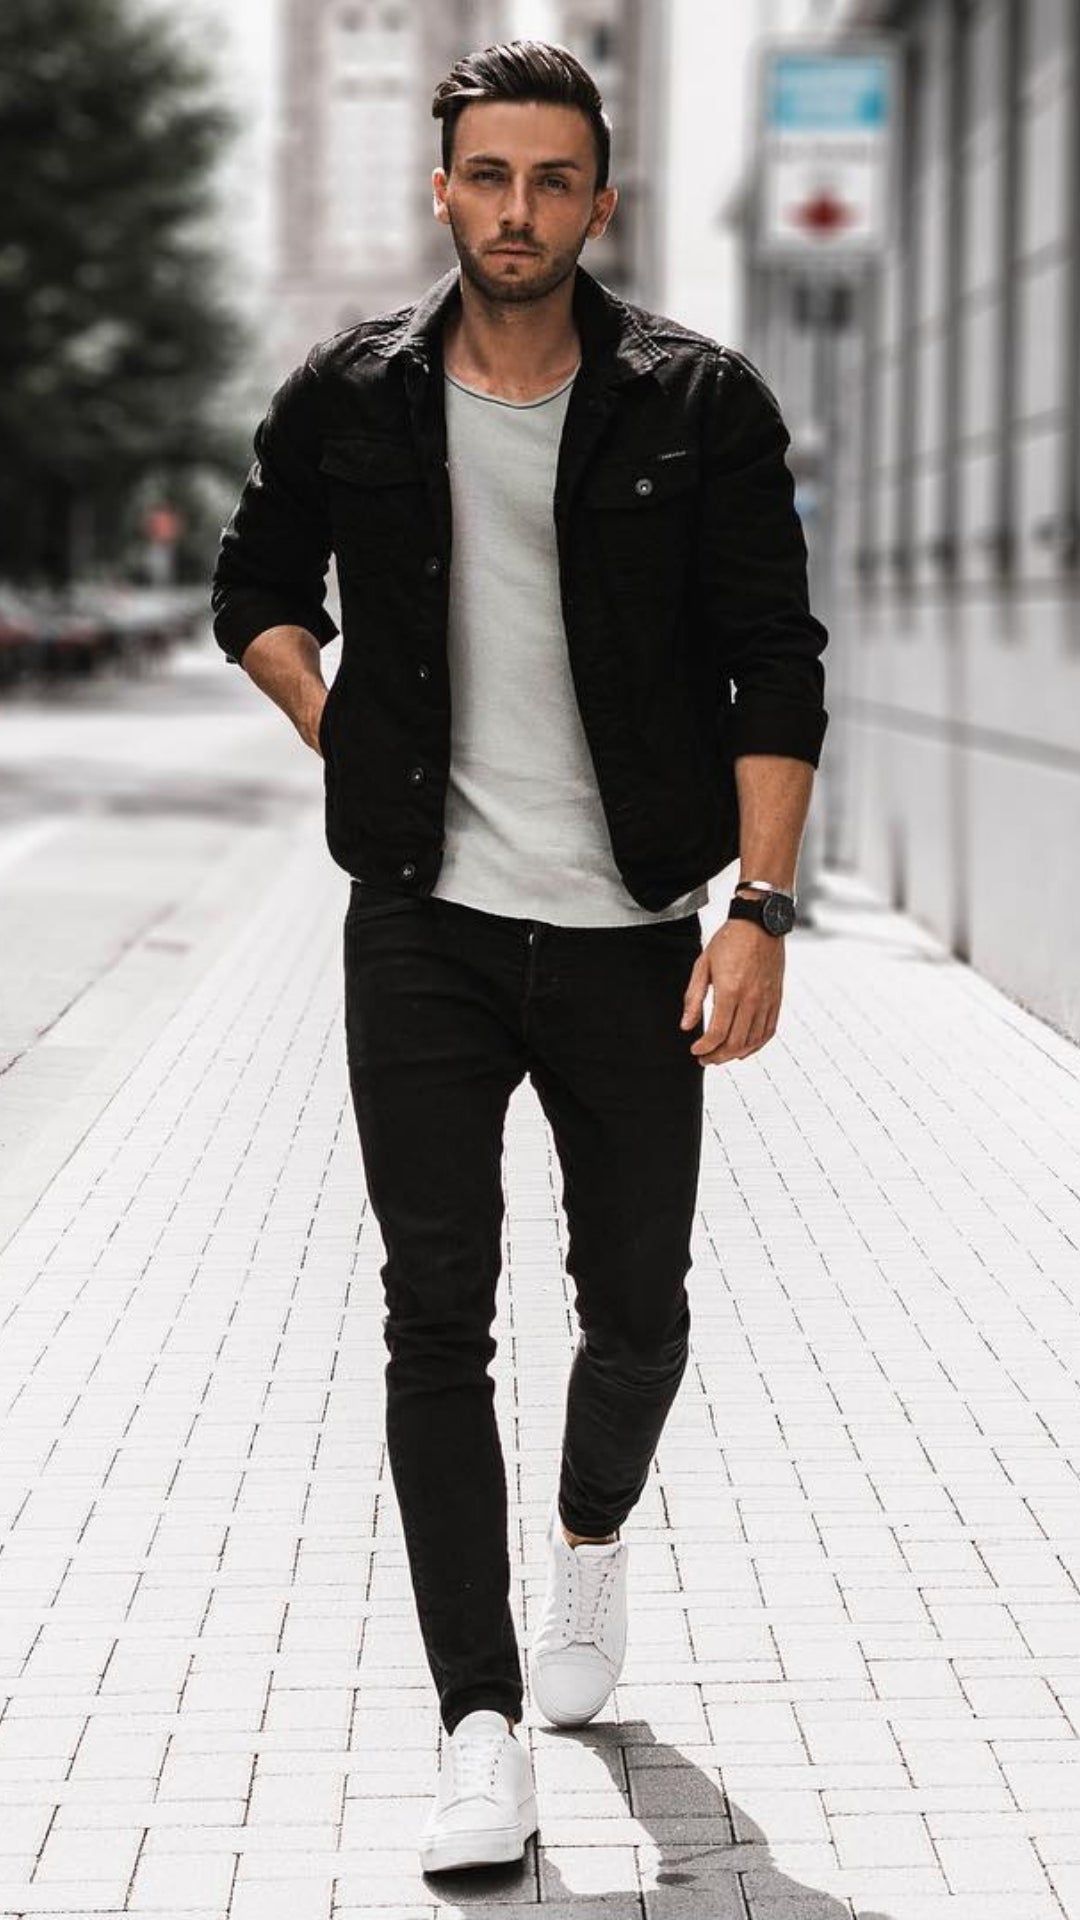 5 Outfits You Need To Look Totally Dapper This Winter #winterfashion # ...